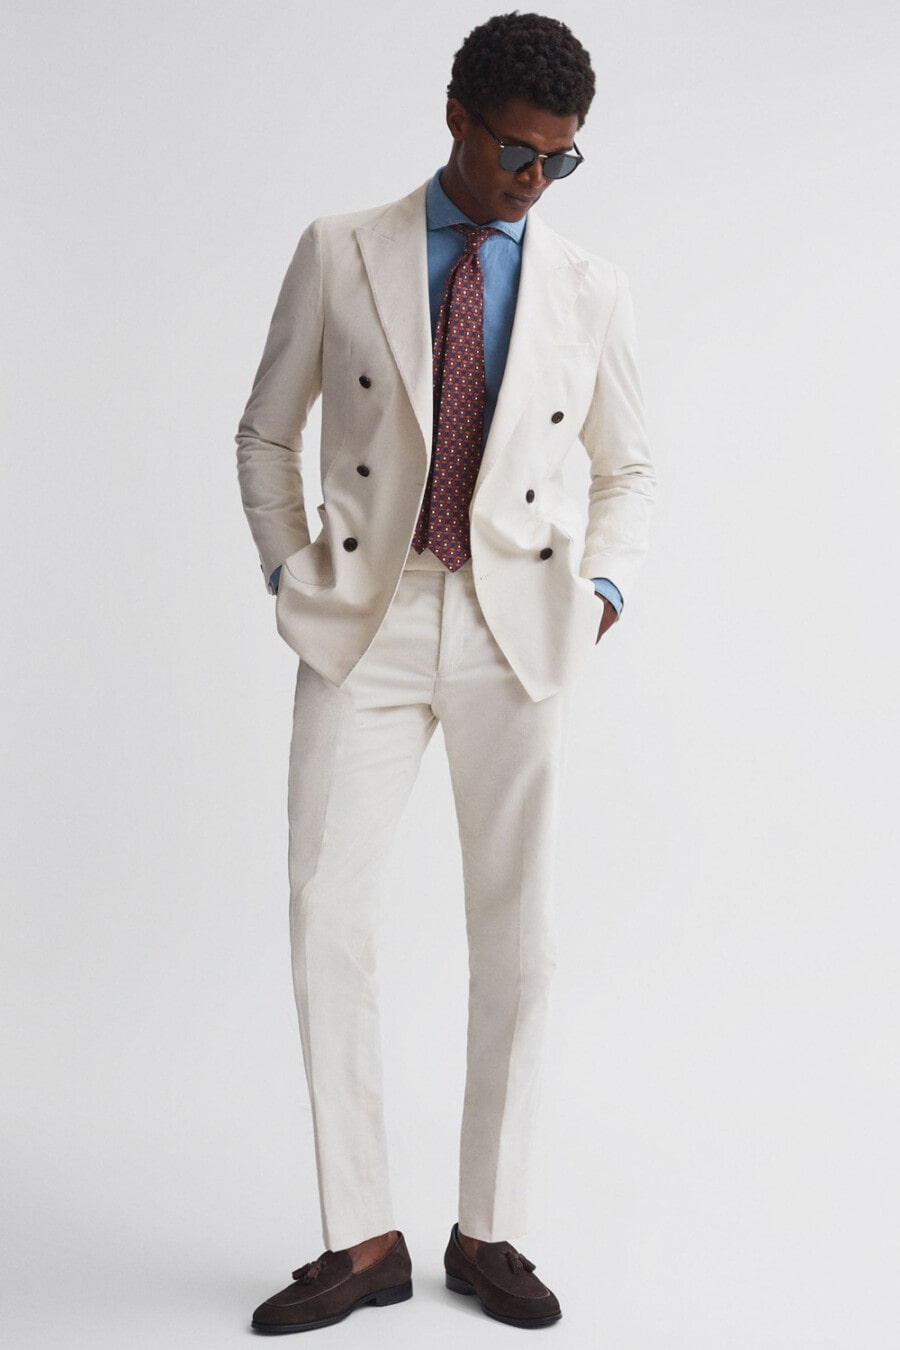 Men's cream double-breasted suit, chambray shirt, burgundy patterned tie and brown suede tassel loafers worn sockless outfit